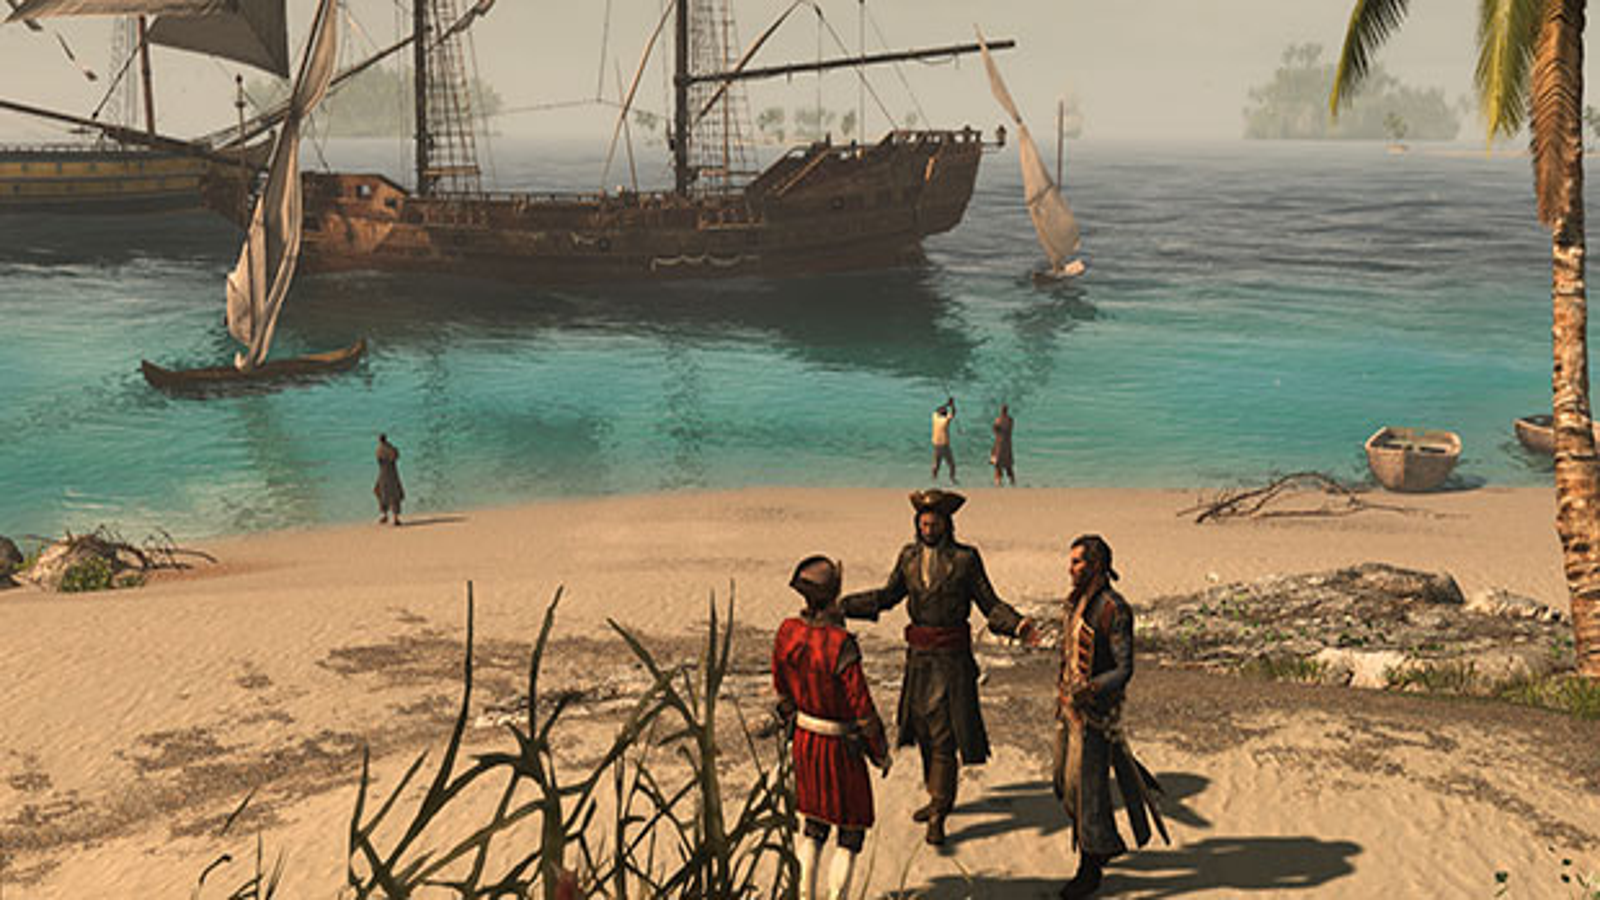 Assassin's Creed IV: Black Flag delivers addictive, open-world piracy amid  some choppy waters (review), Page 2 of 2